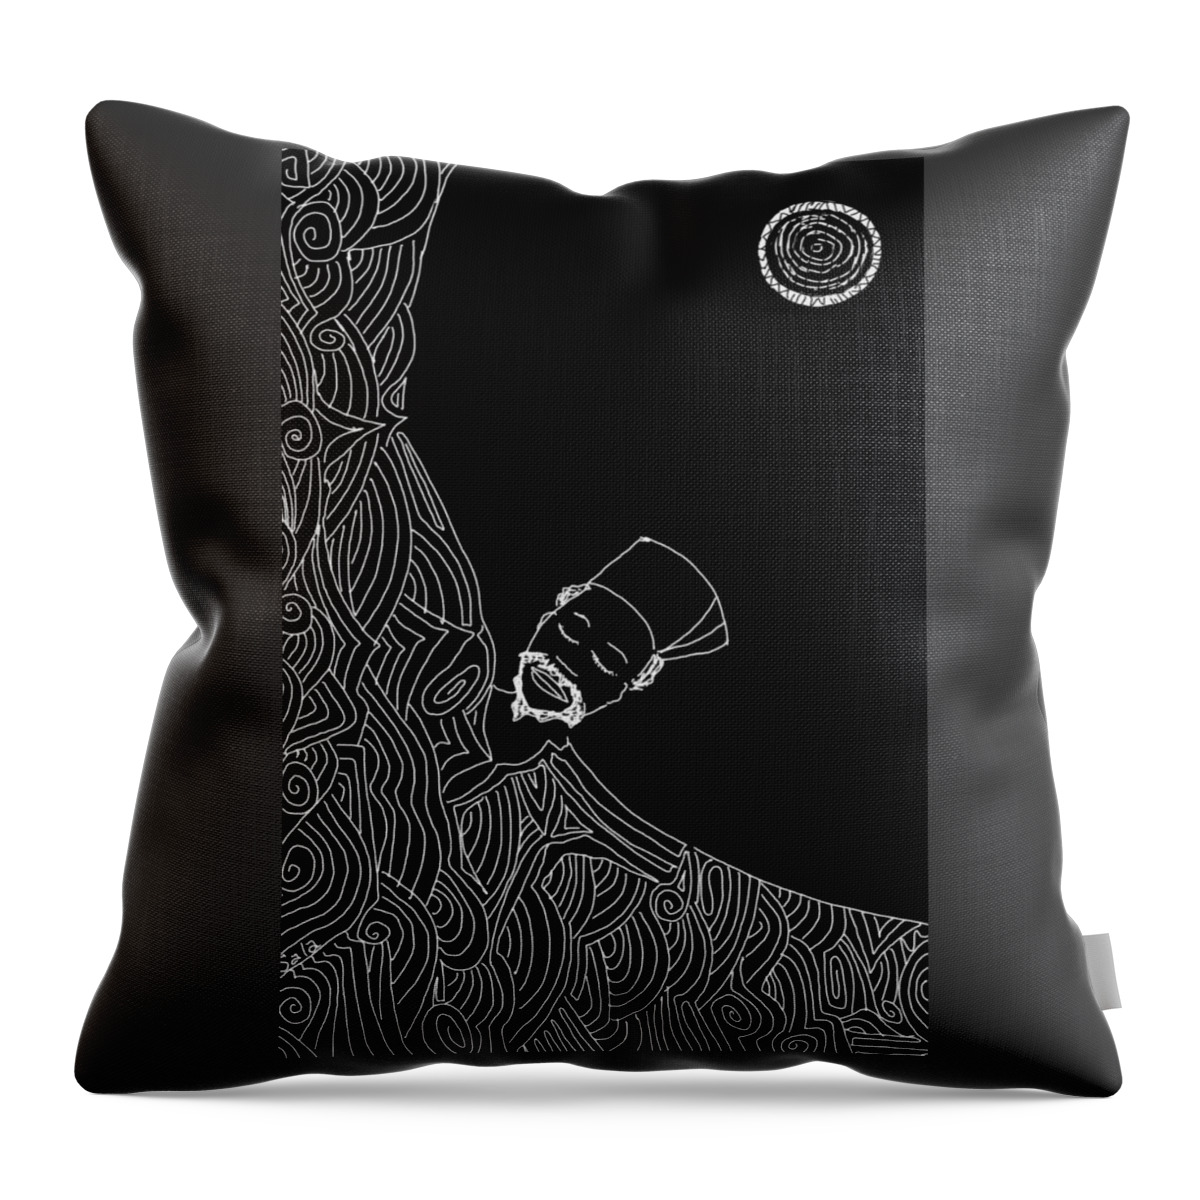  Throw Pillow featuring the drawing Moonlit wisdom Black by Sala Adenike